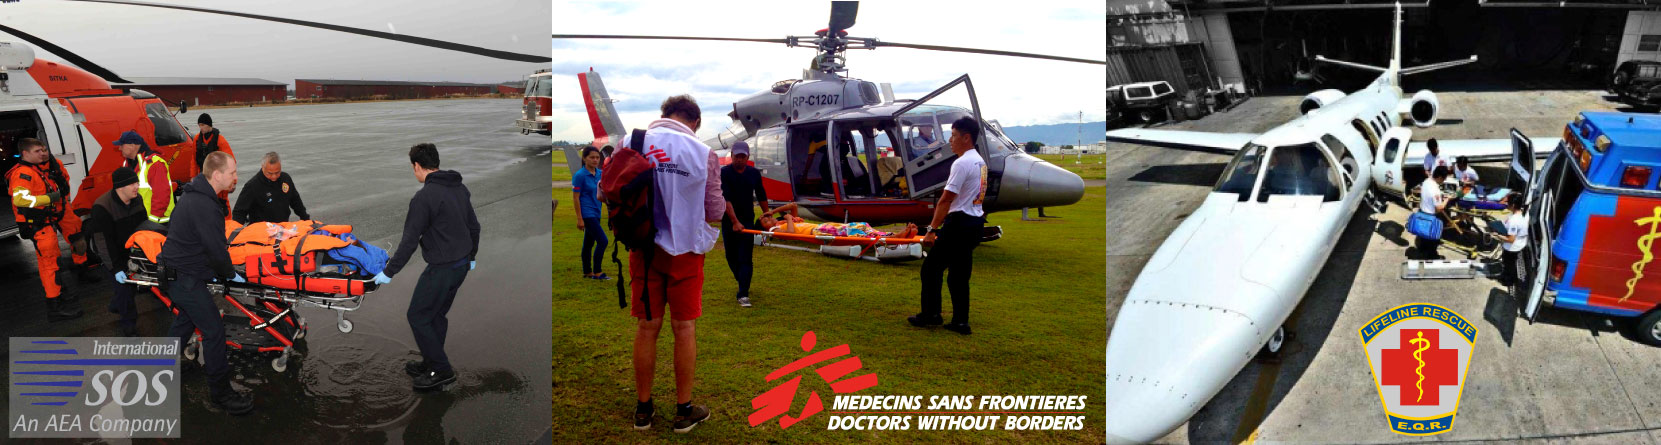 Emergency Medical Services or helicopter rescue